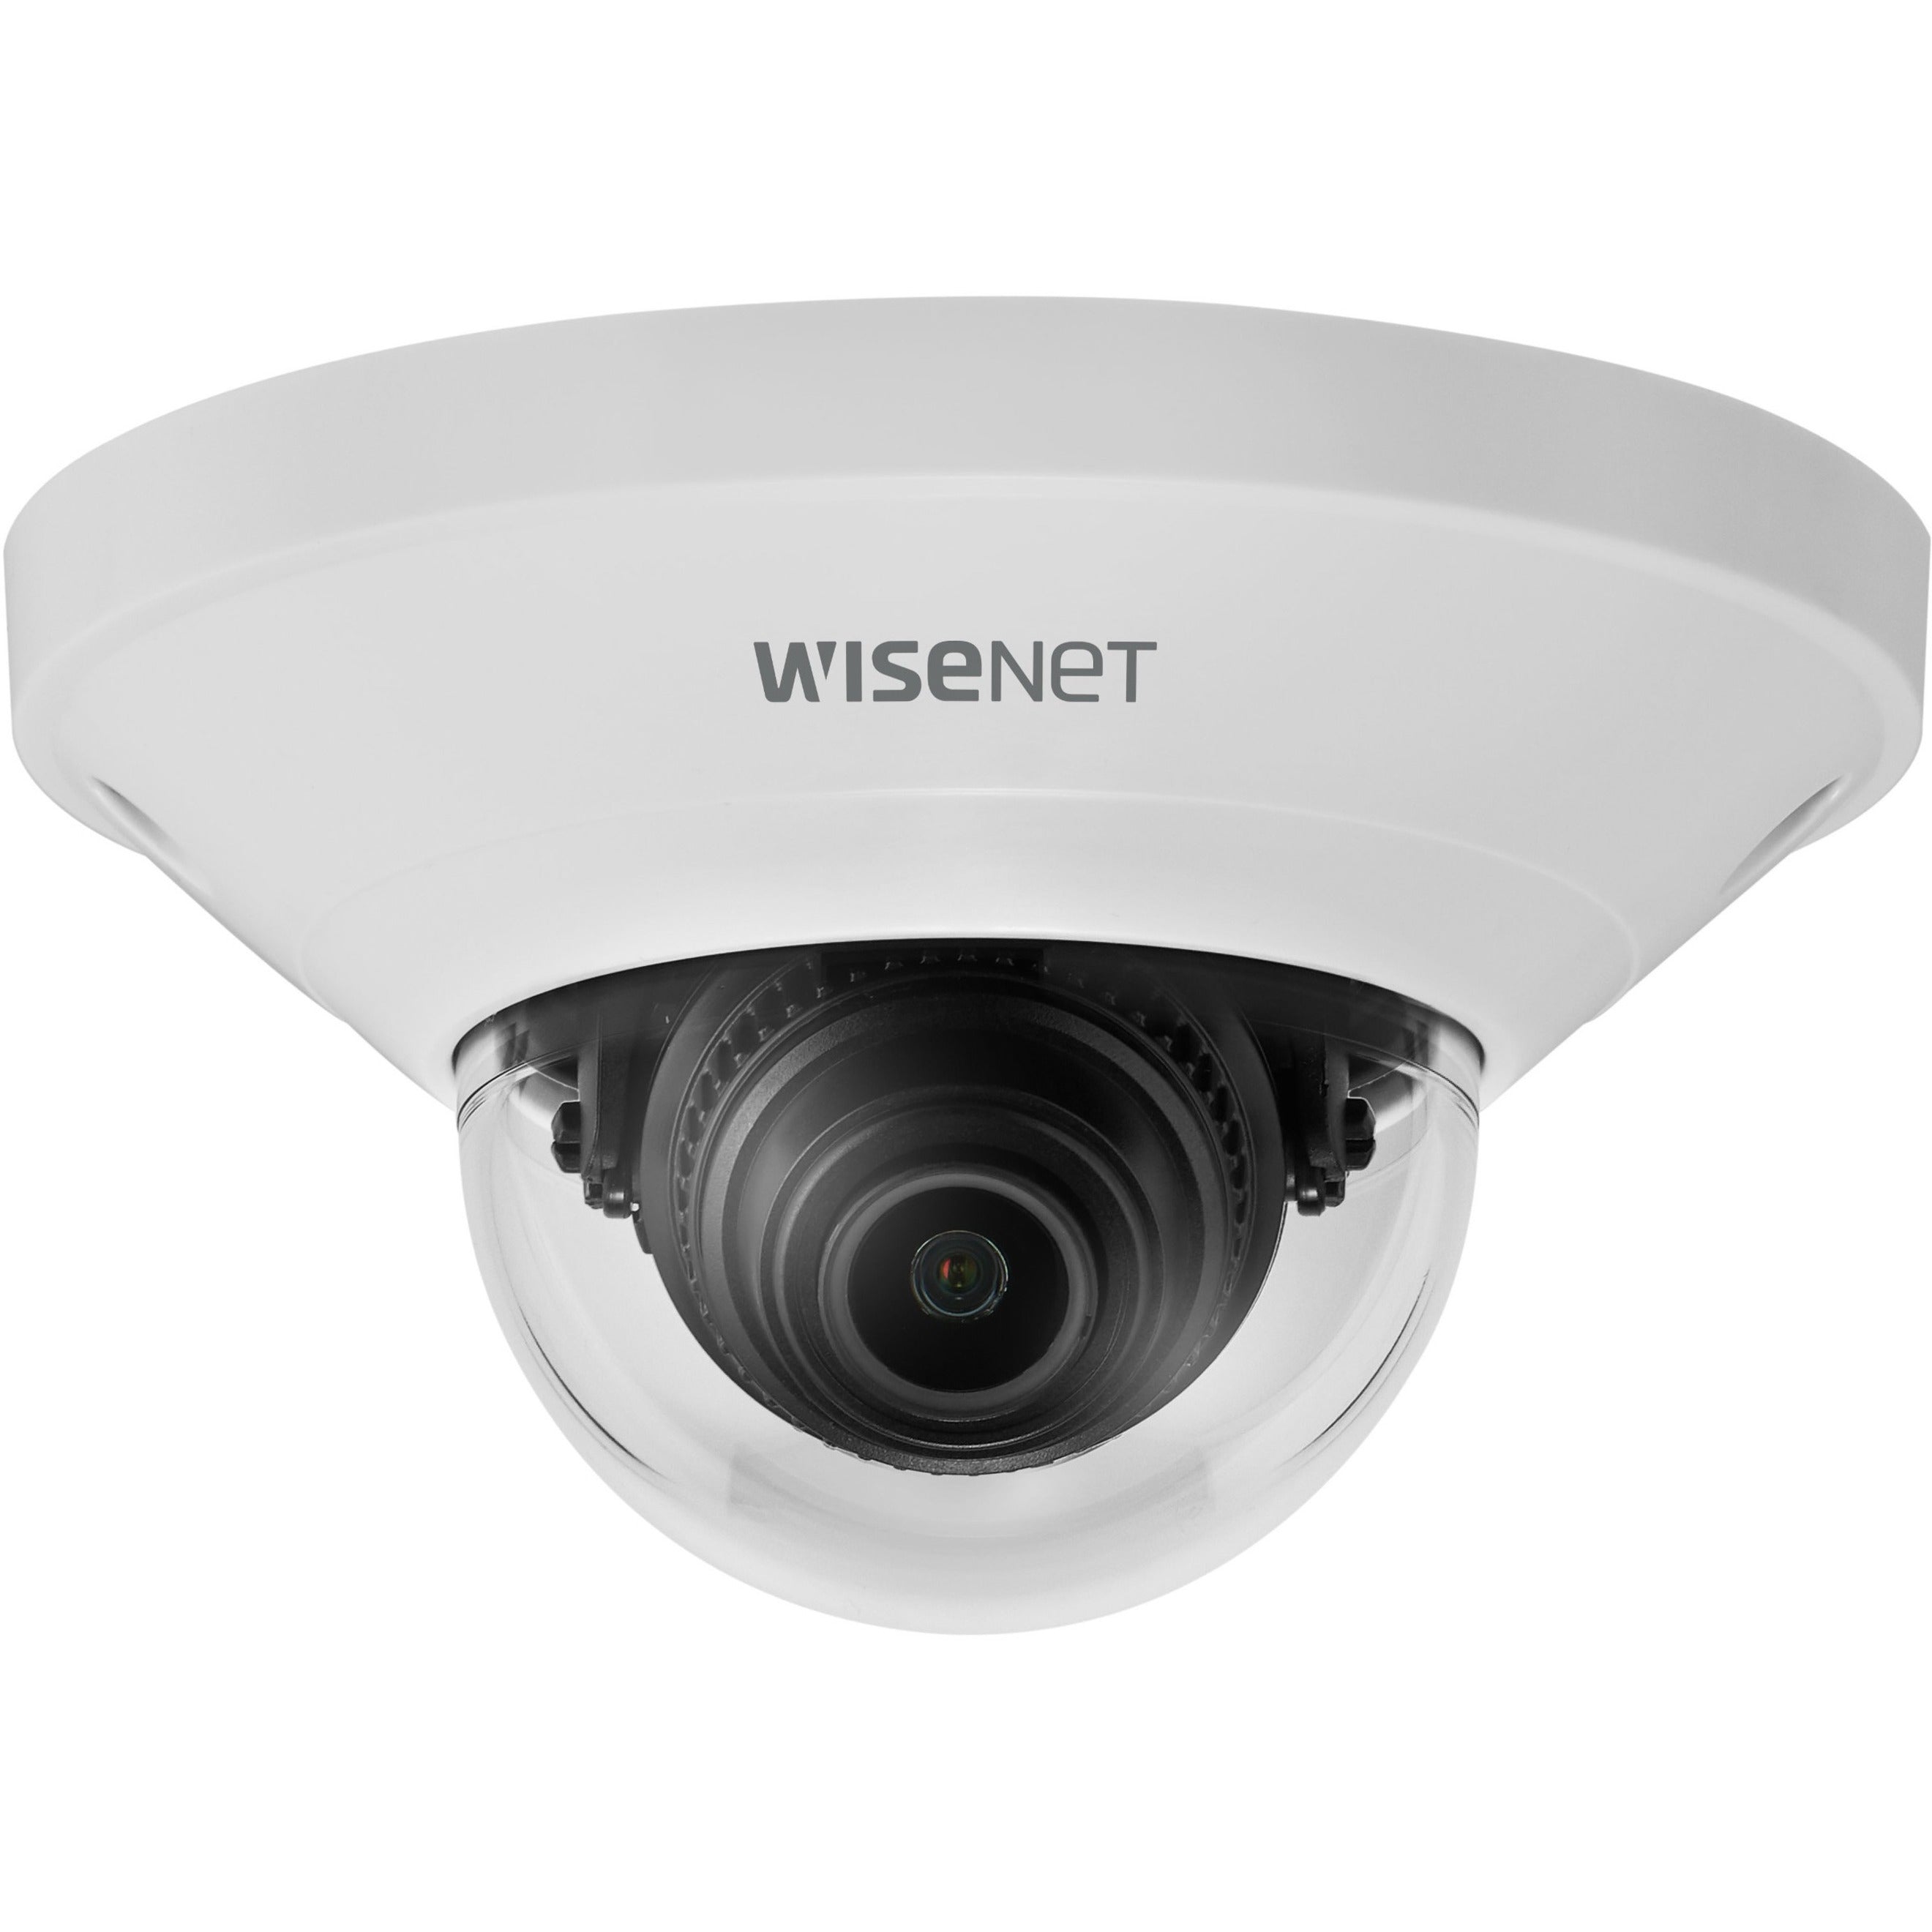 Wisenet QND-8011 5 MP Network Super-Compact Dome Camera with 2.8mm Lens, Indoor, 30fps, SD Card Local Storage